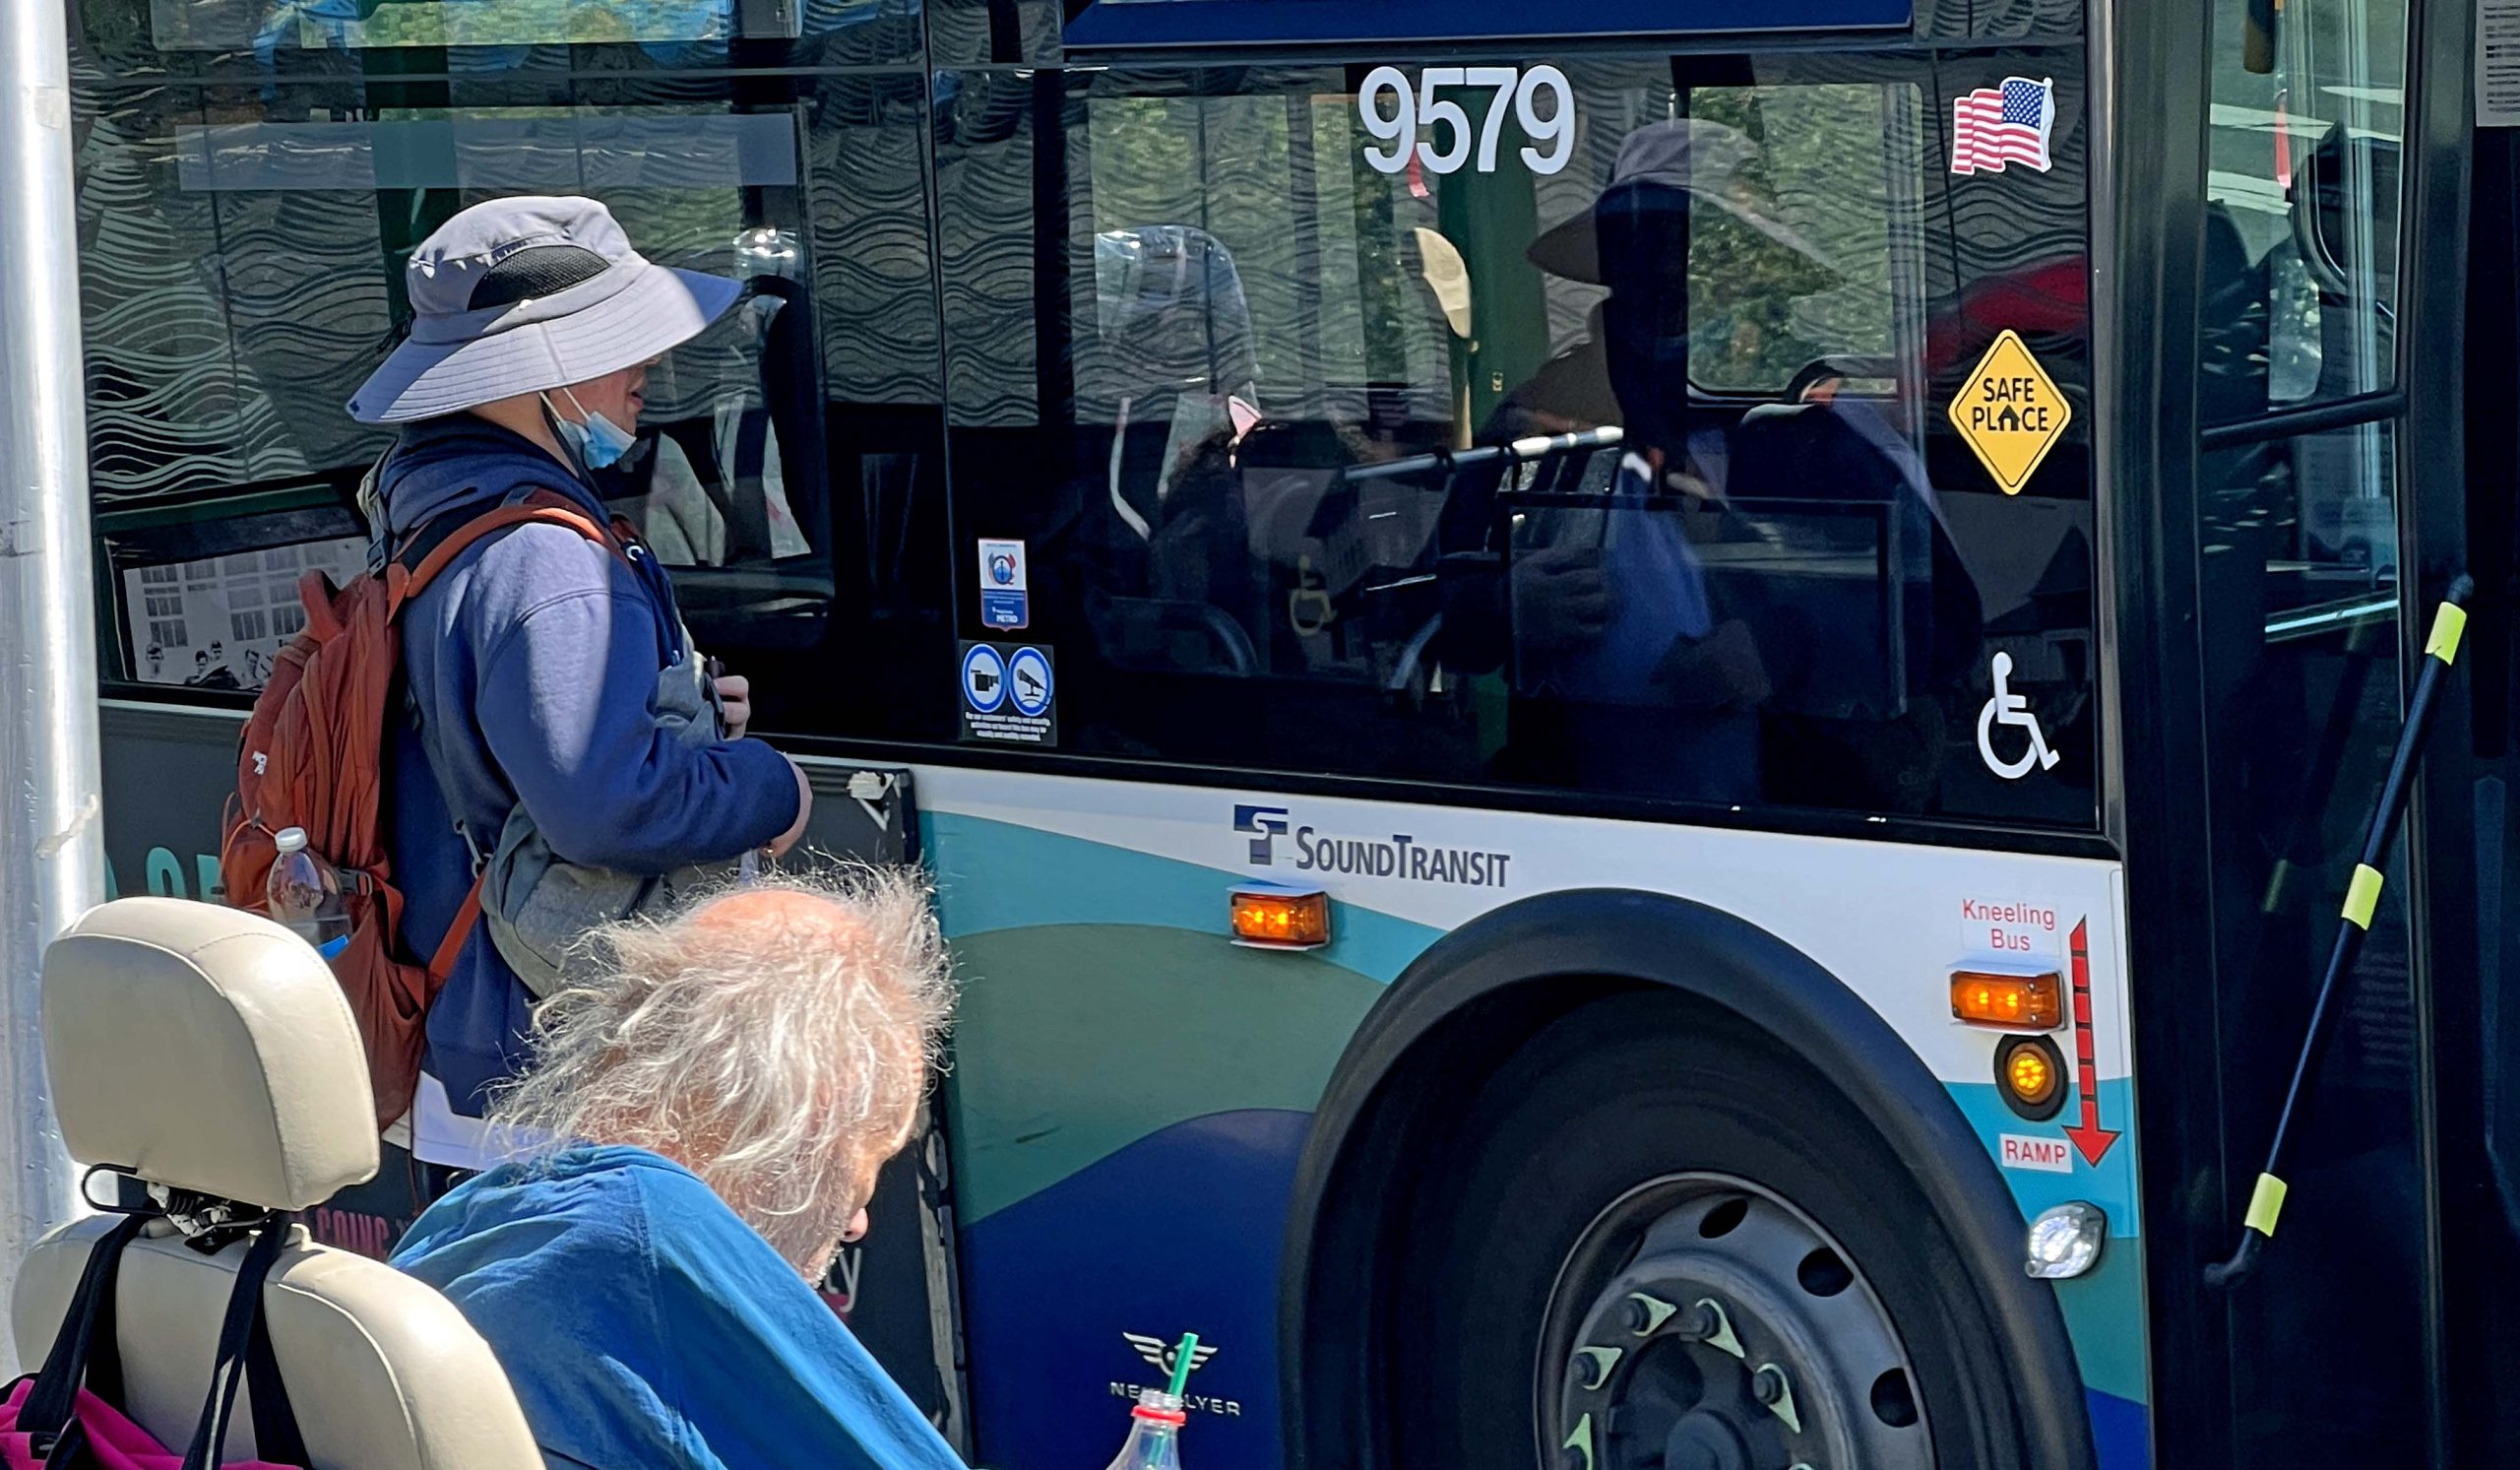 A woman and a man in a wheelchair wait to board a Sound Transit bus